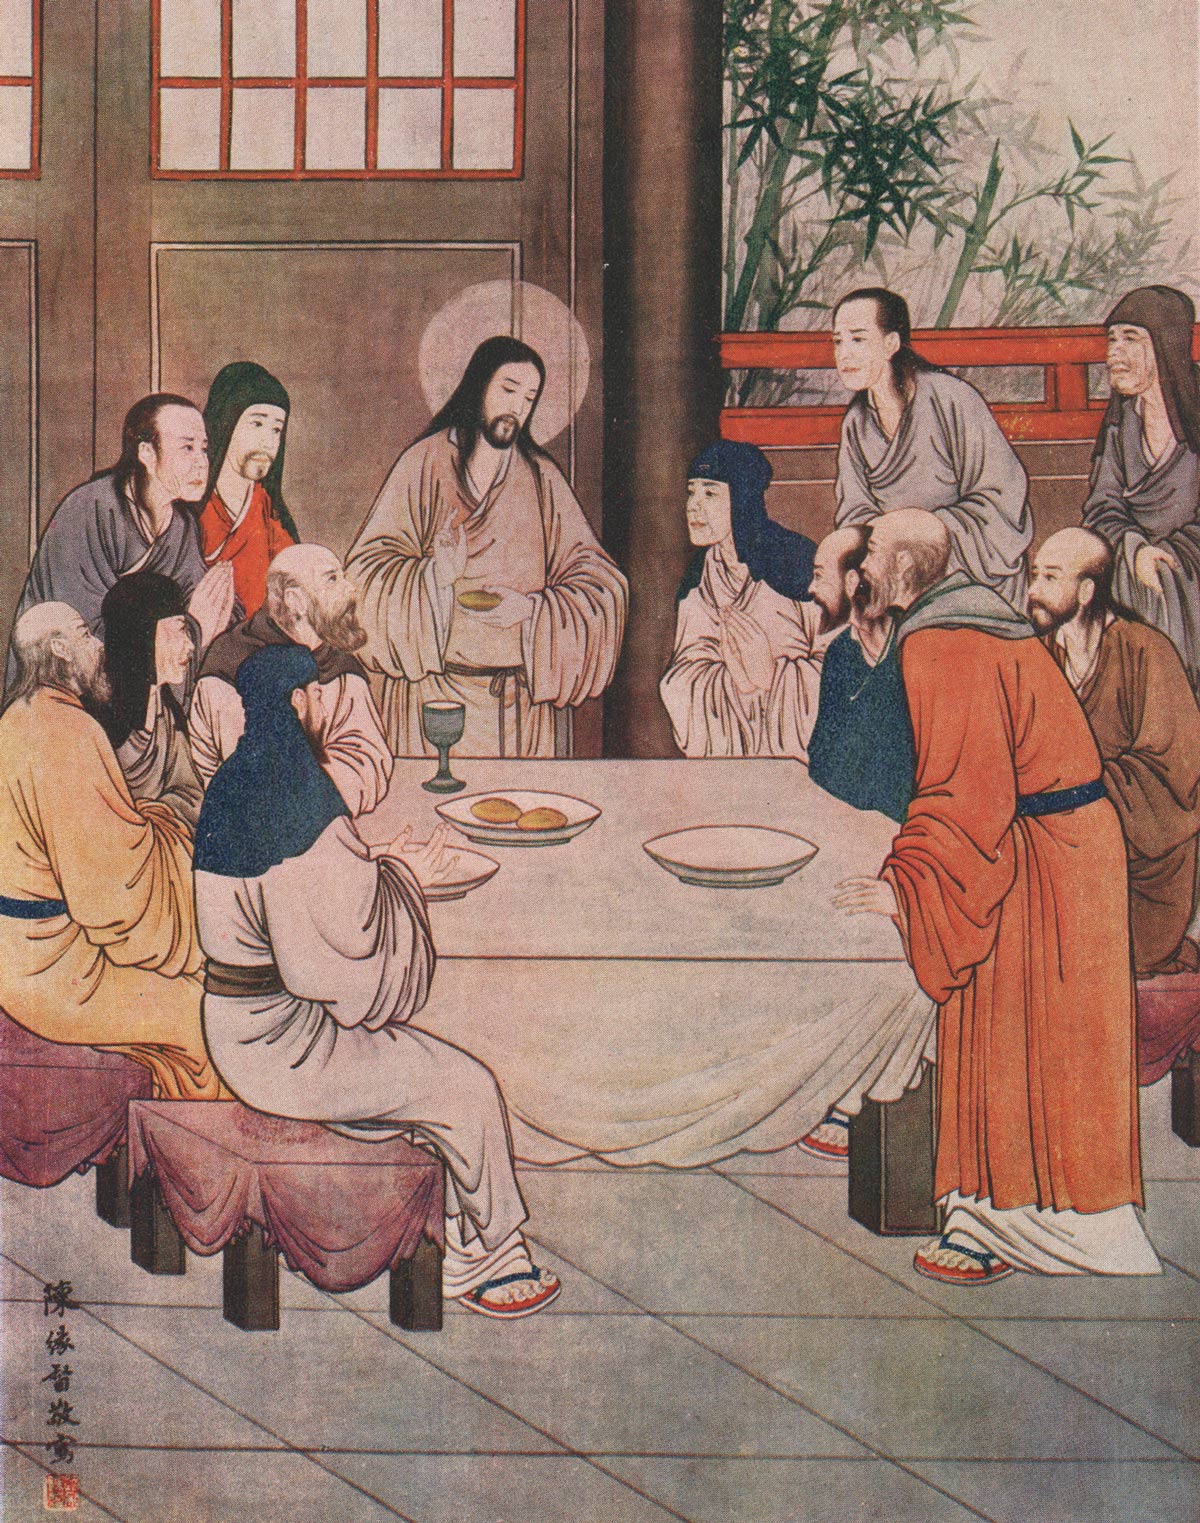 Details of “The Last Supper” by Chen Yuandu, published by Cath. University Press. From Henry Luce Foundation/Boston University